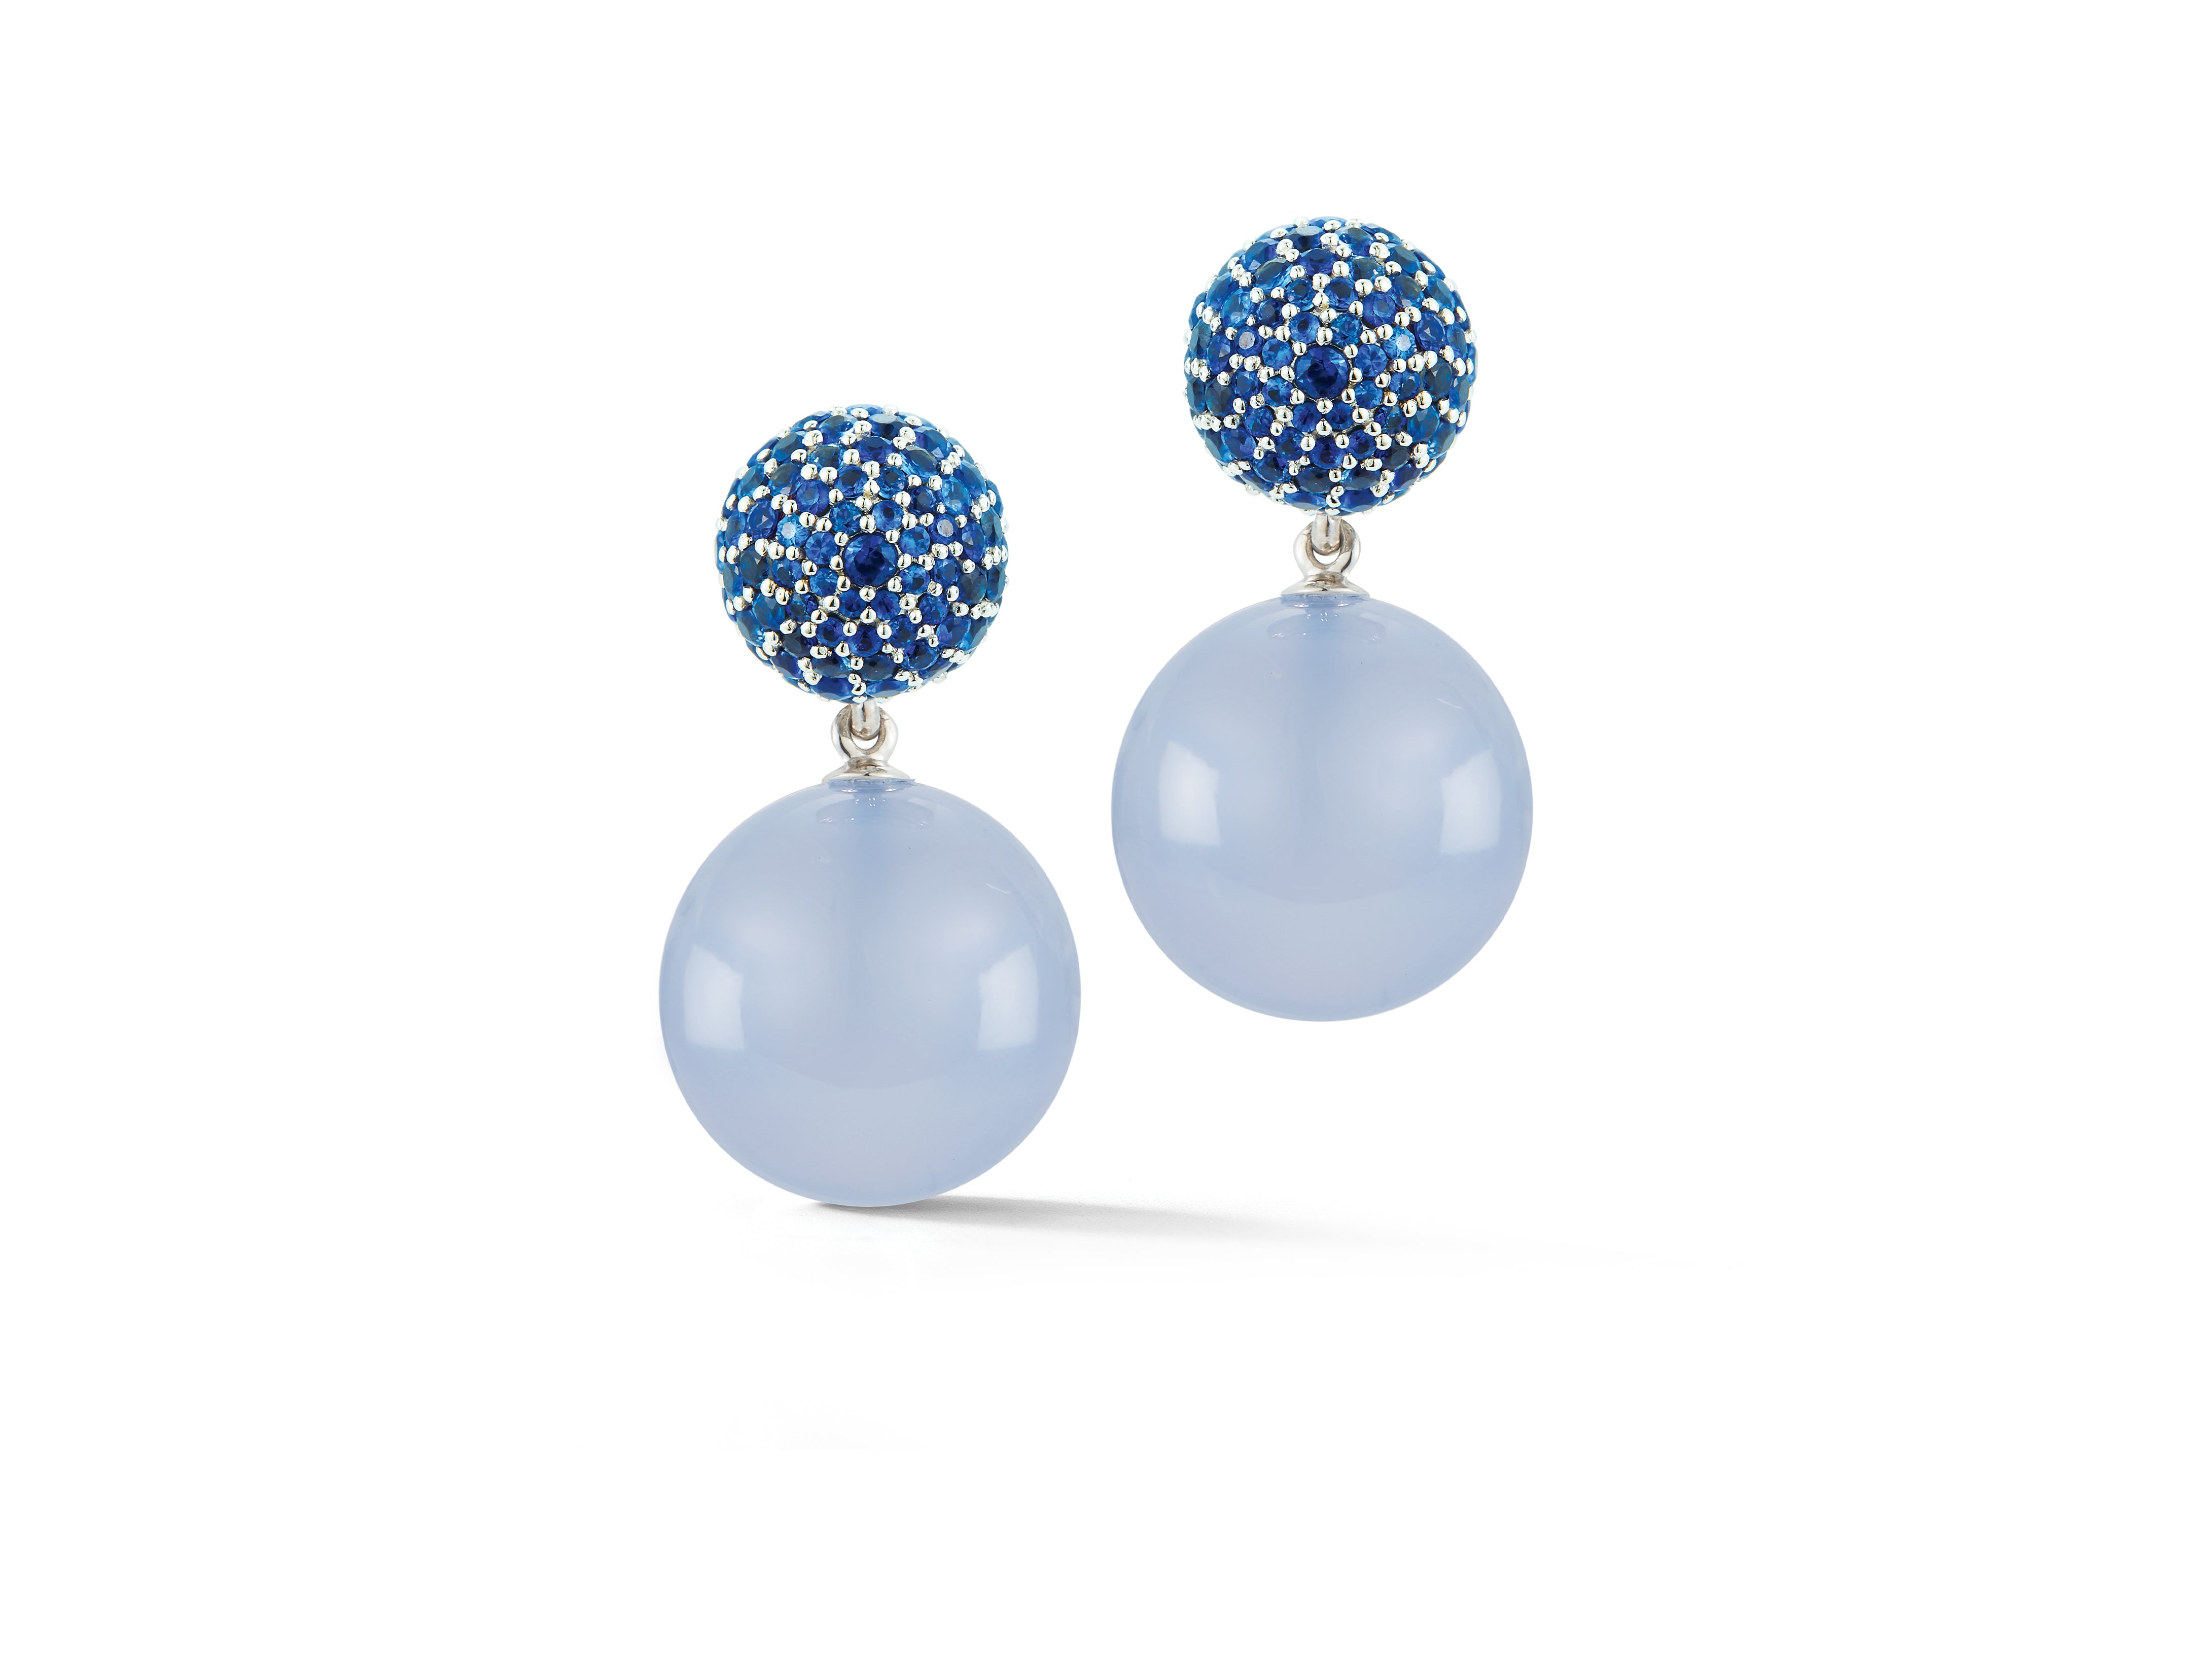 Boule Earrings with Faceted Pave Sapphire Tops and Blue Chalcedony Bead Drop Set in 18 Karat White Gold. Signed Seaman Schepps.